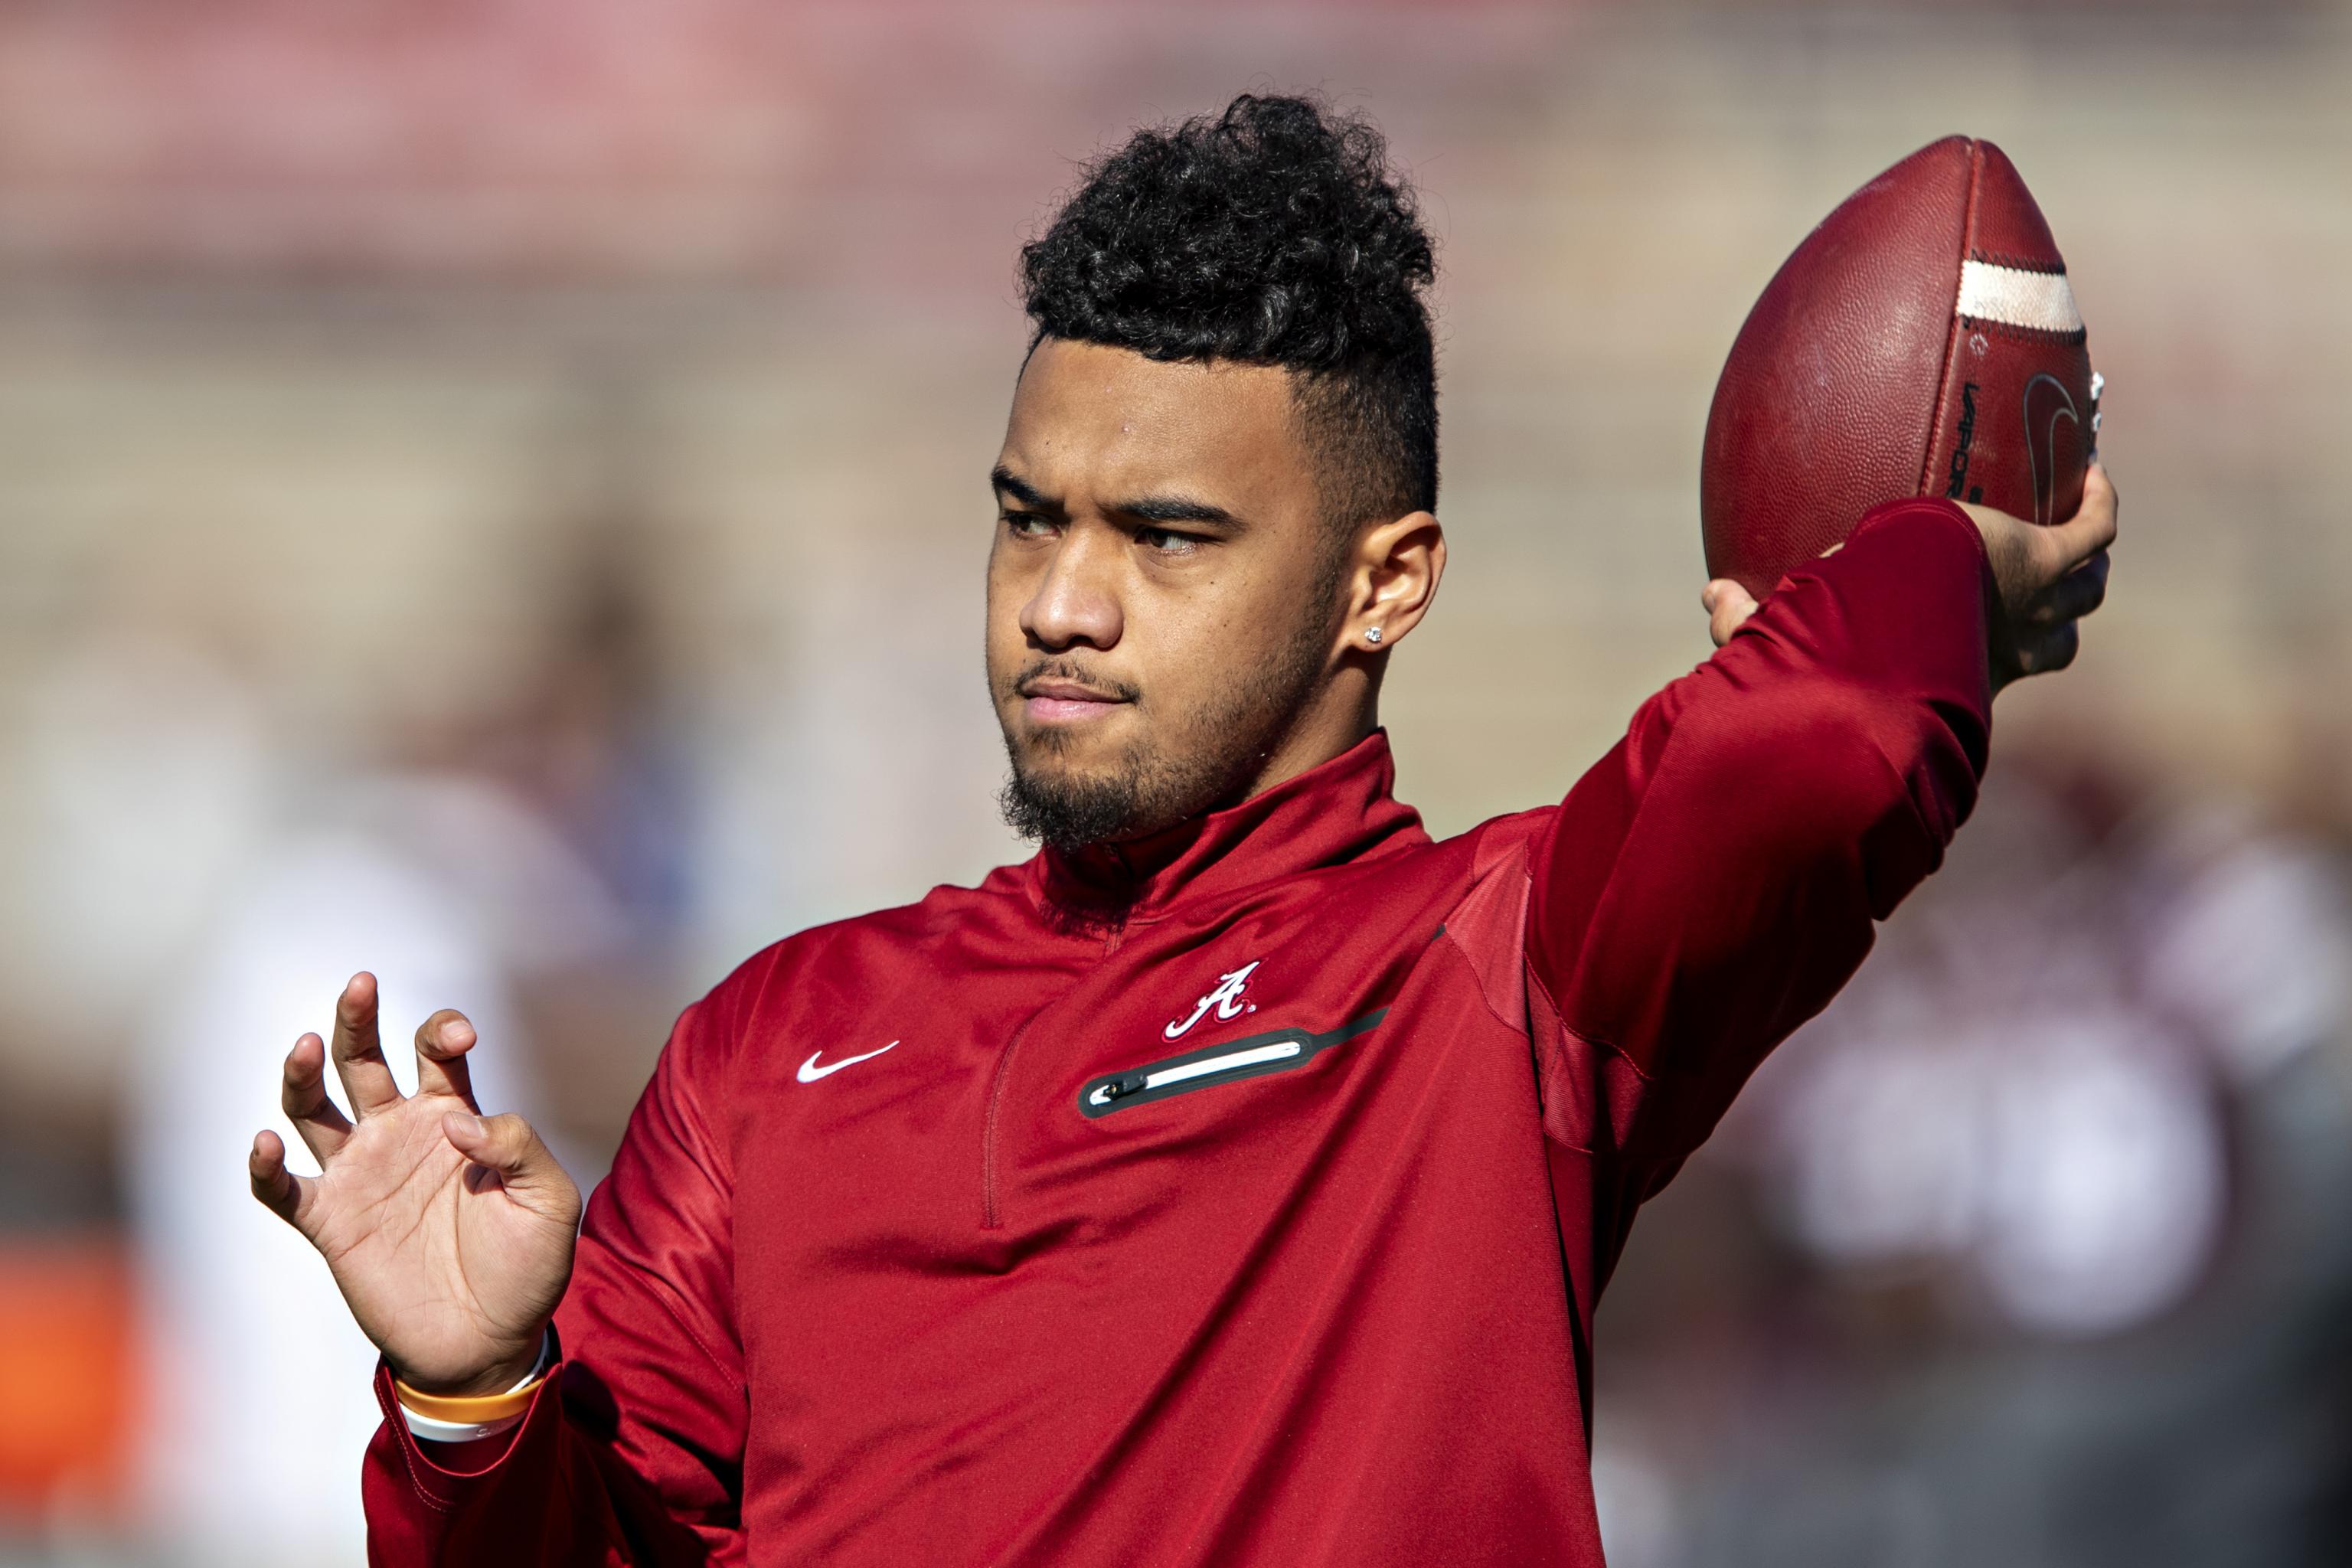 Tua Tagovailoa ranked as 15th best quarterback according to ESPN poll - The  Phinsider